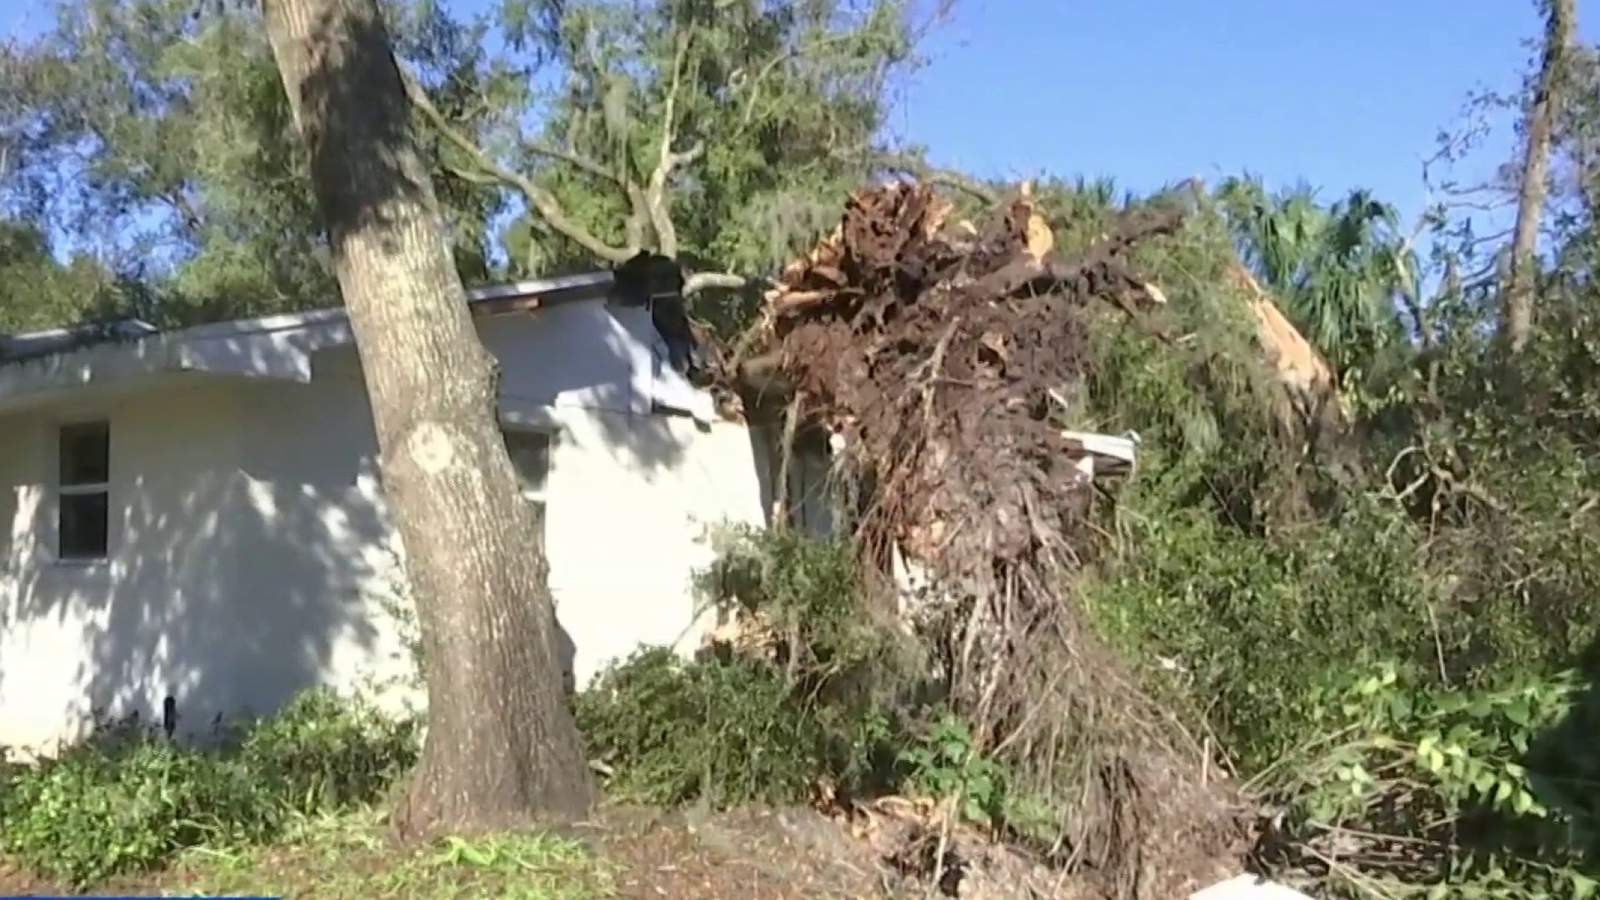 Cleanup underway after storms in Deland